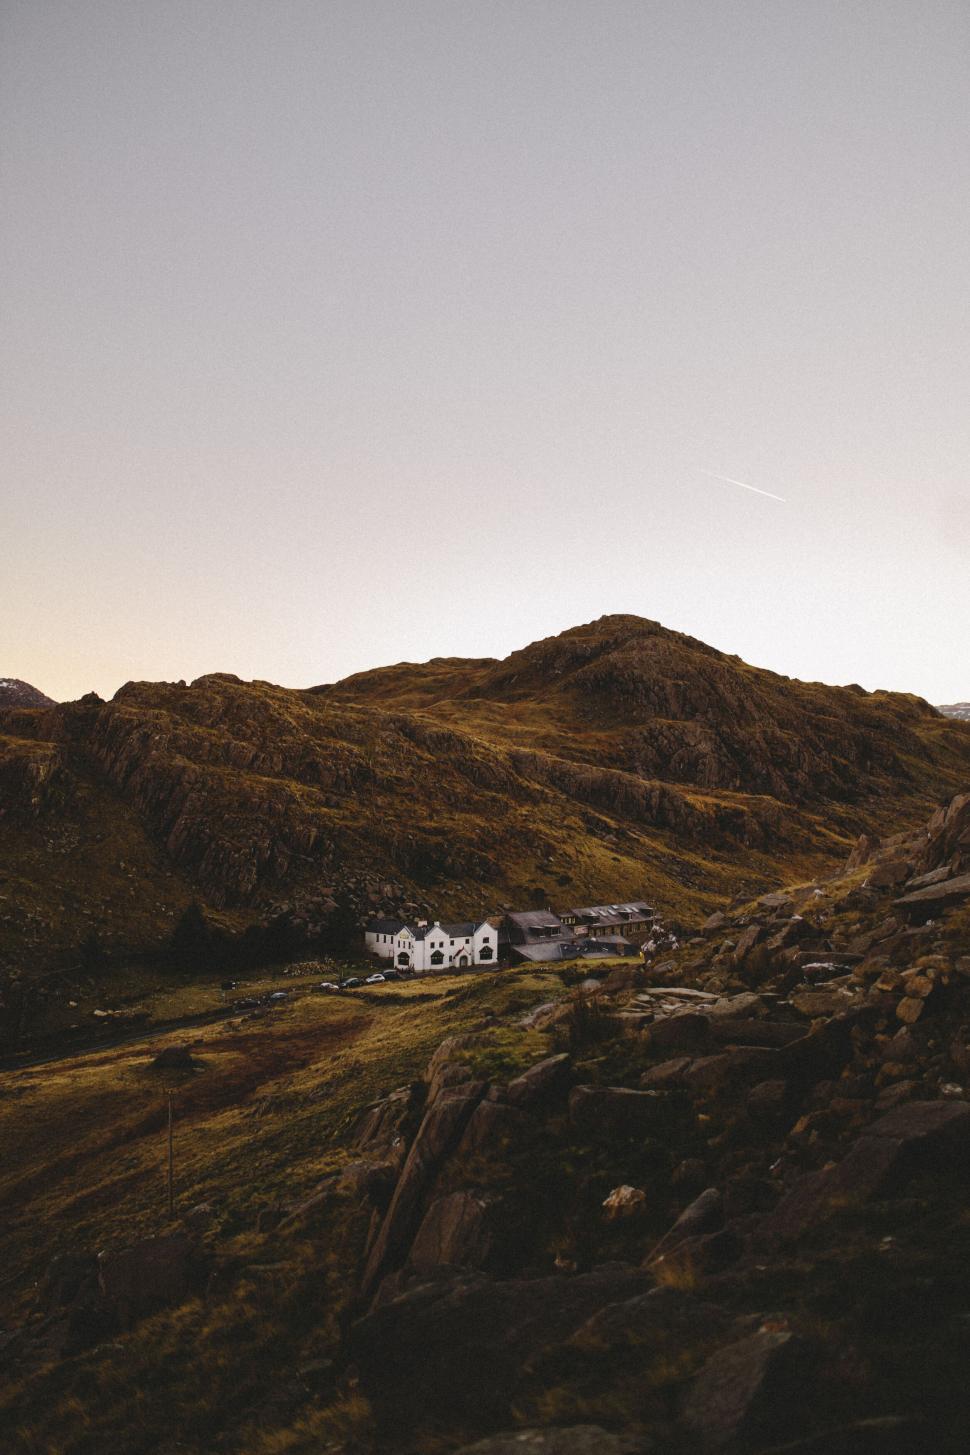 Free Image of Remote house in mountainous countryside at dusk 